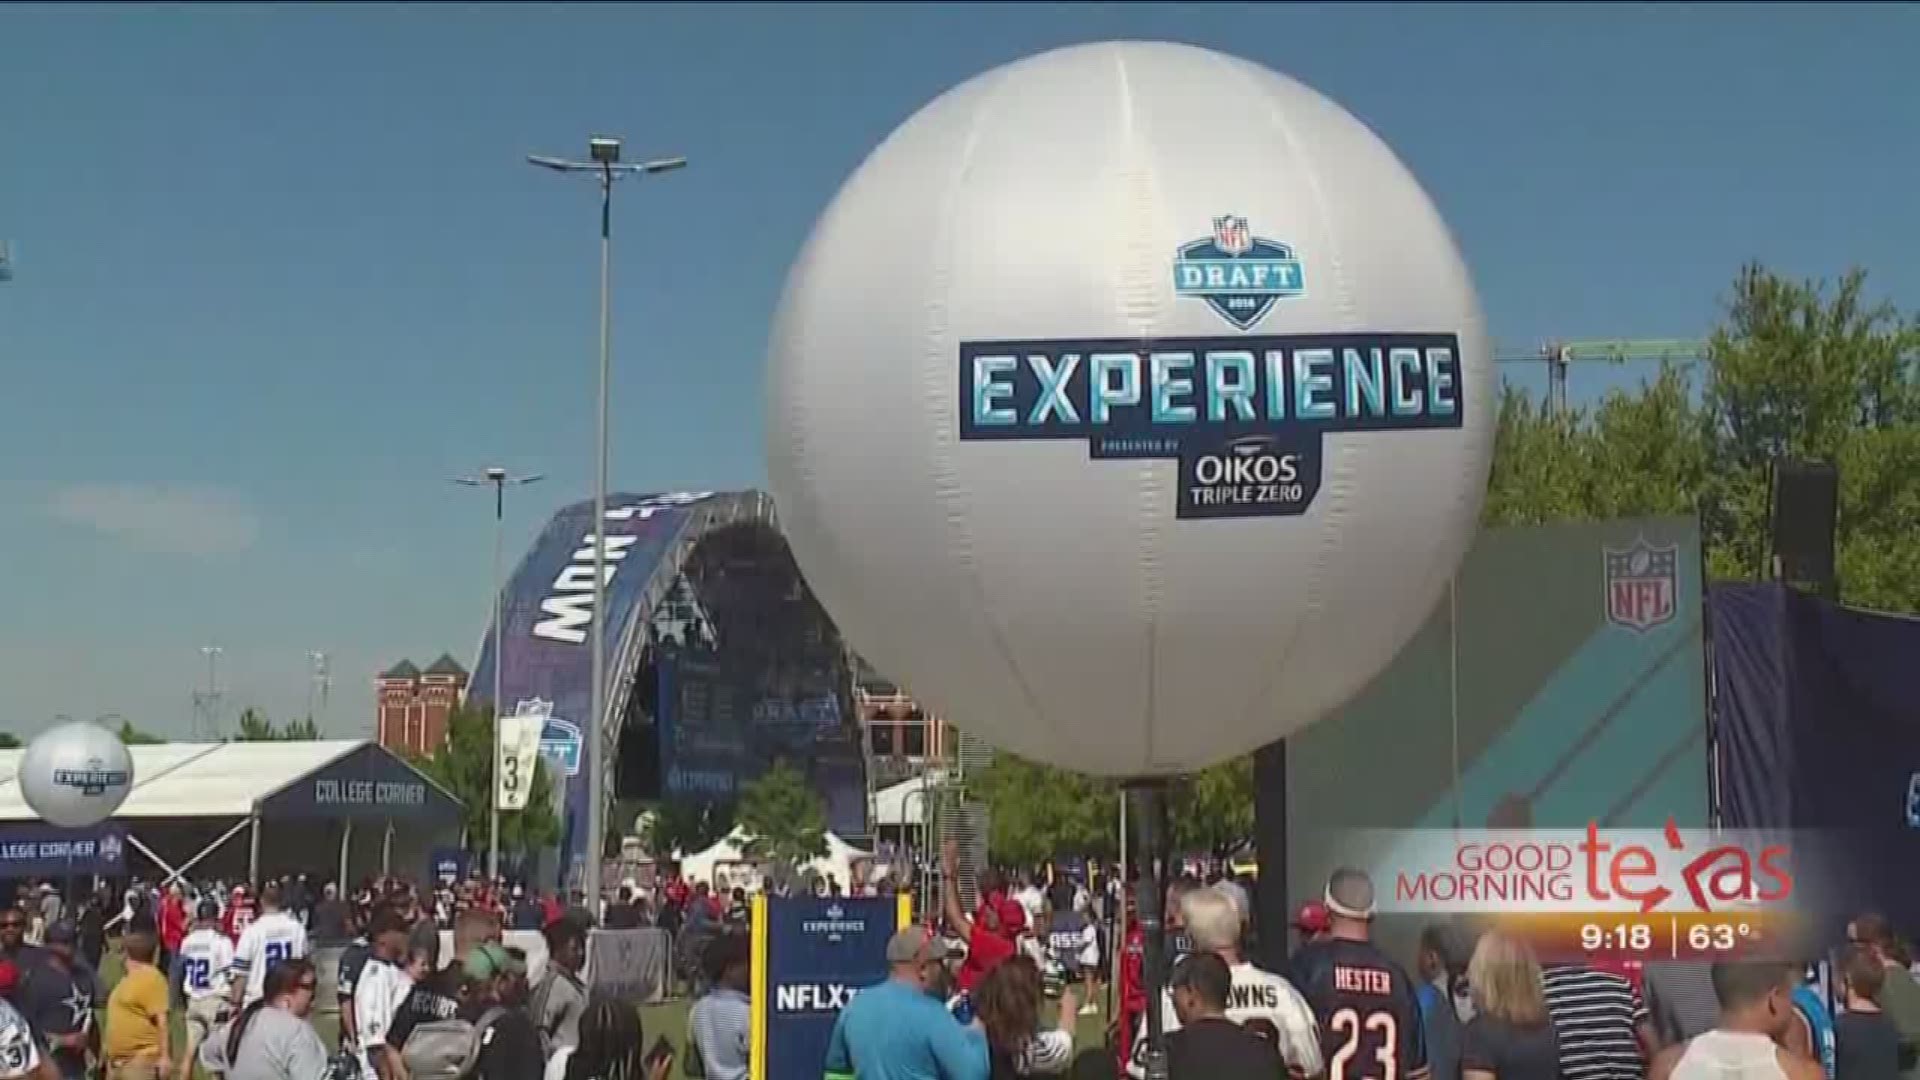 Go Behind the NFL Draft Experience at AT&T Stadium. It is free to enjoy. For more information go to nfl.com/draft